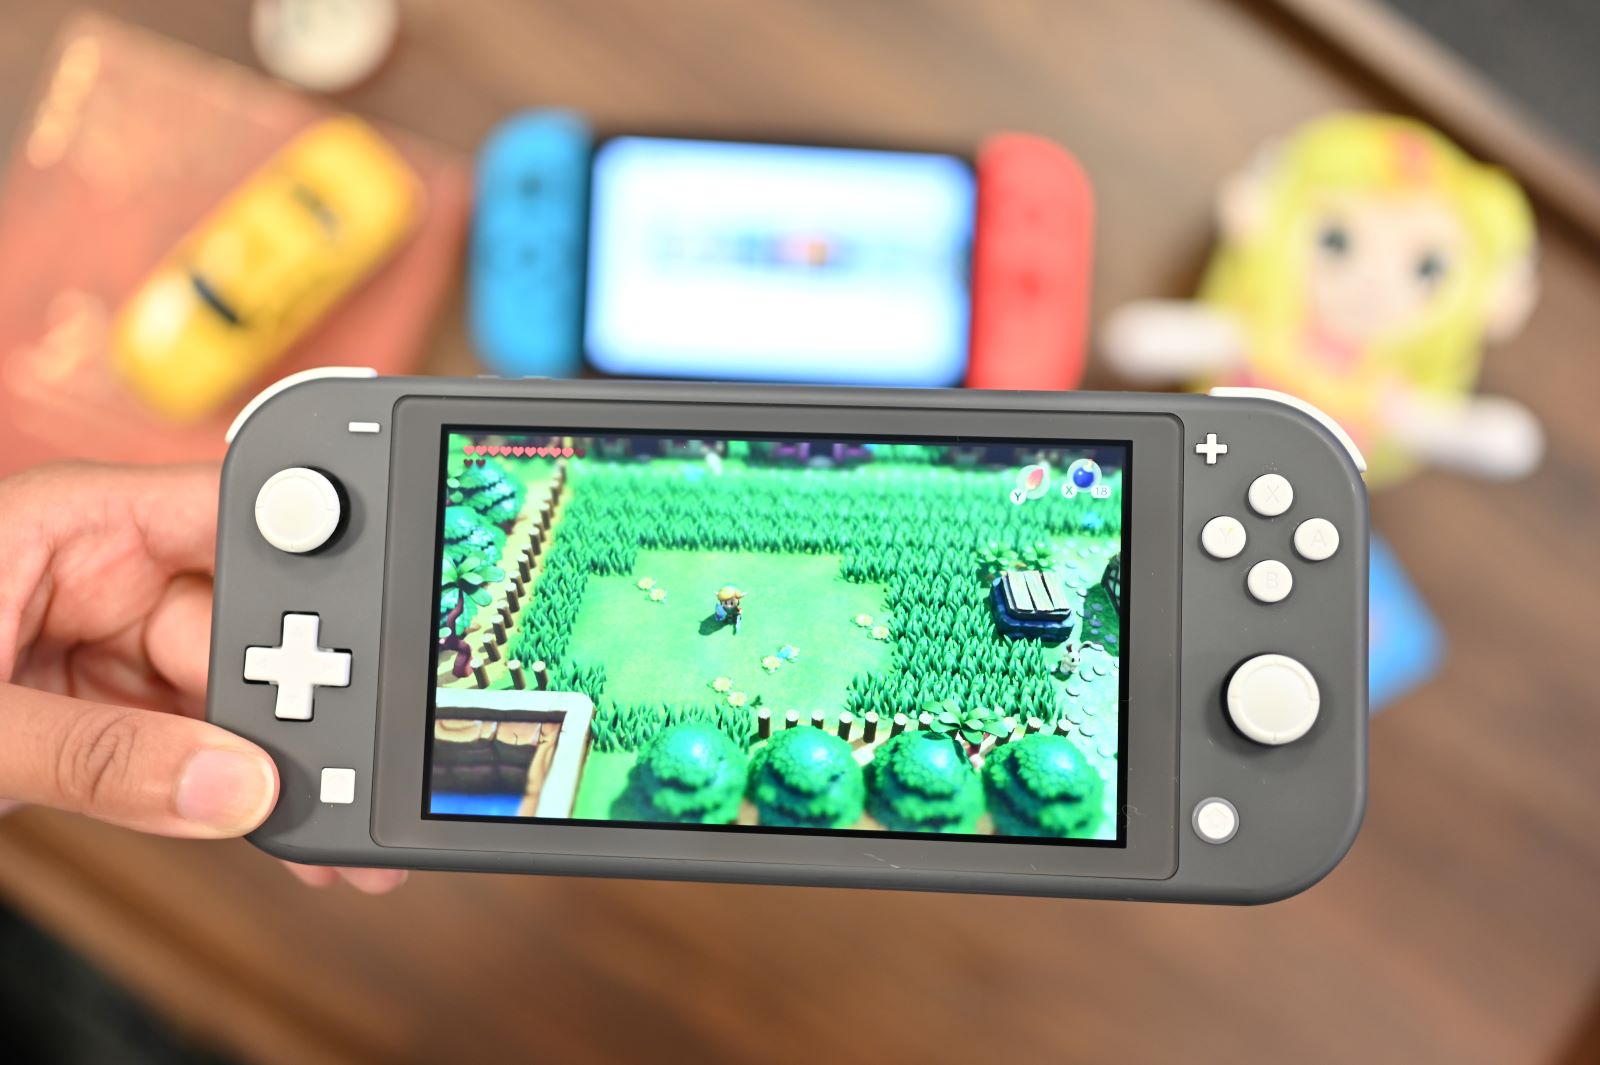 Nintendo Switch Lite is the best portable system Nintendo has ever made